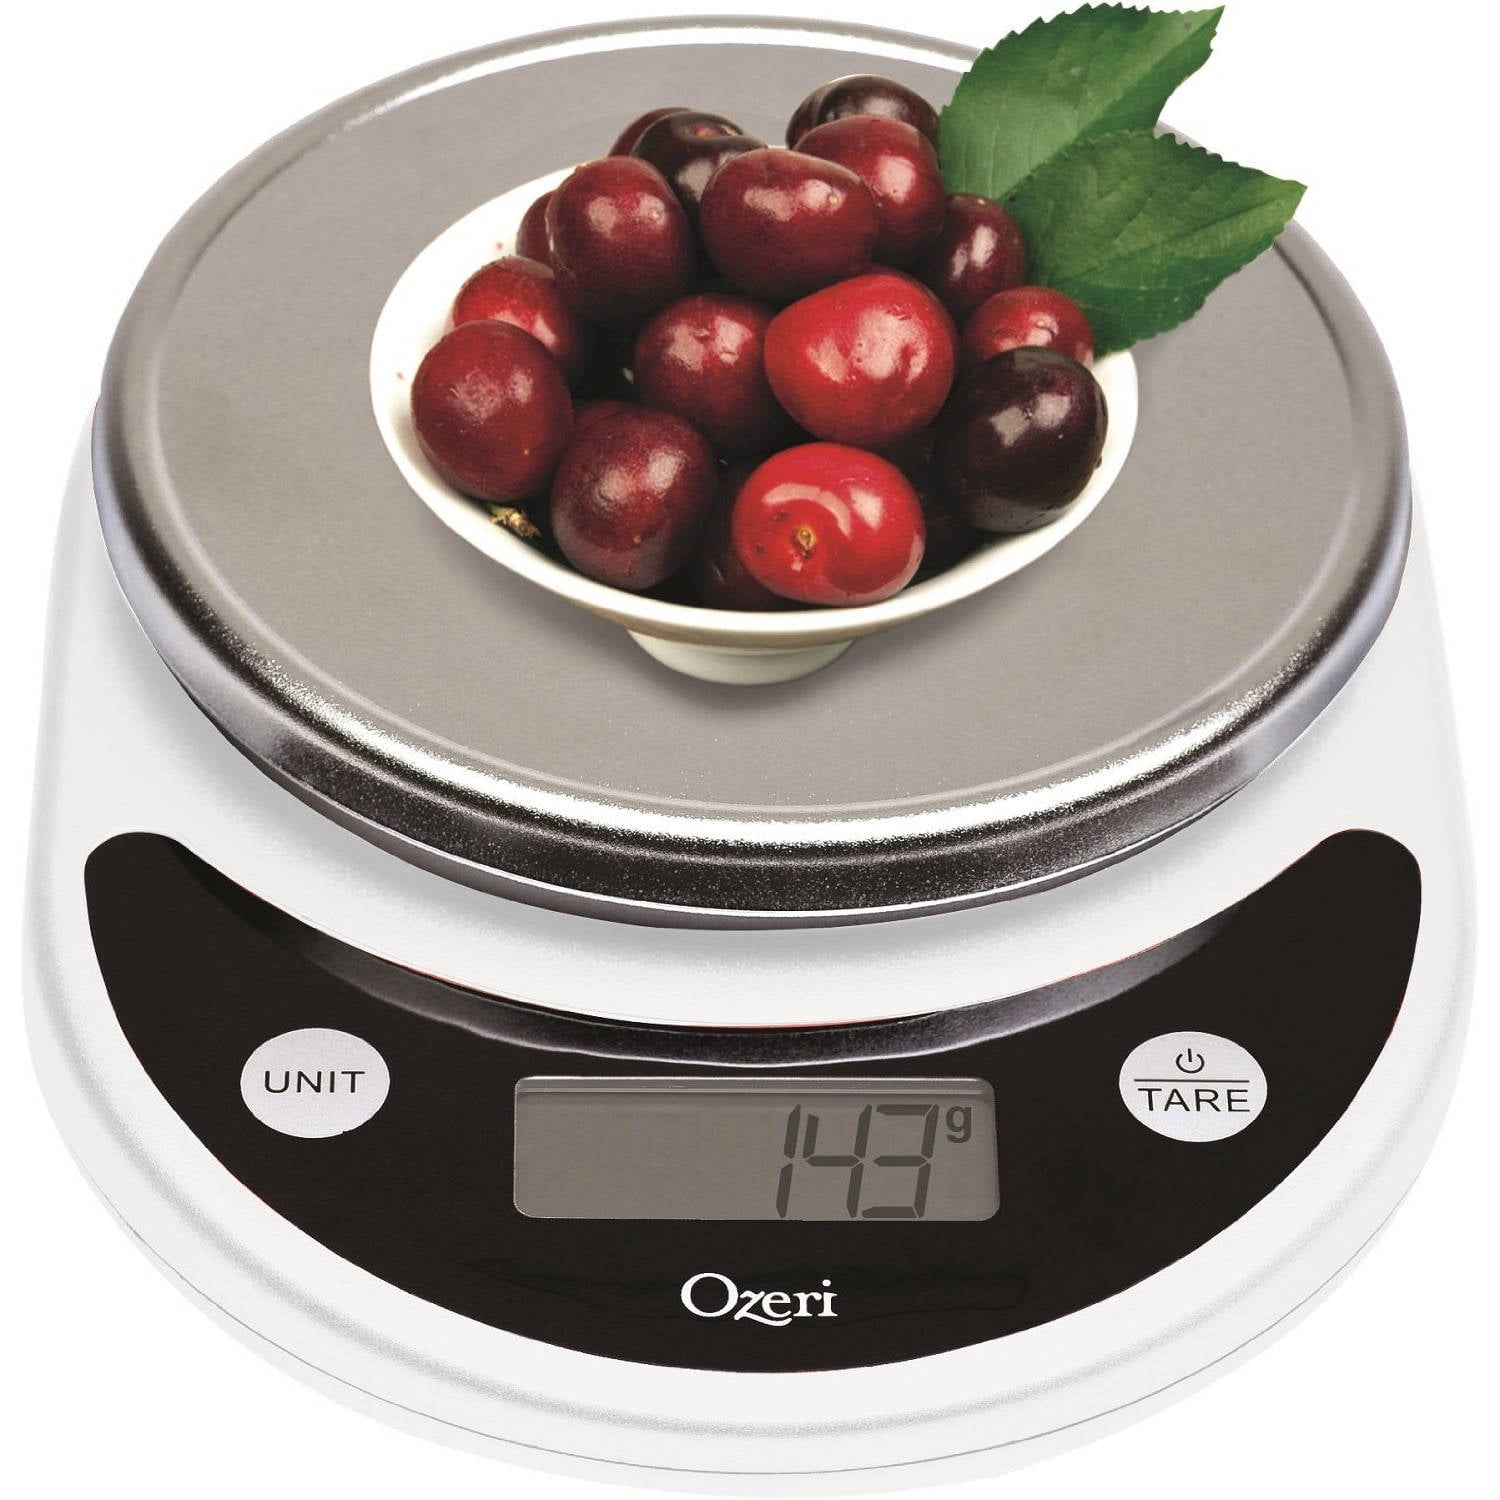  Online Auctions - Save Huge - Ship or Pick Up - NEW Tomiba  EK6011 Digital Kitchen Food Scale for Baking, 5kg/11lbs, White